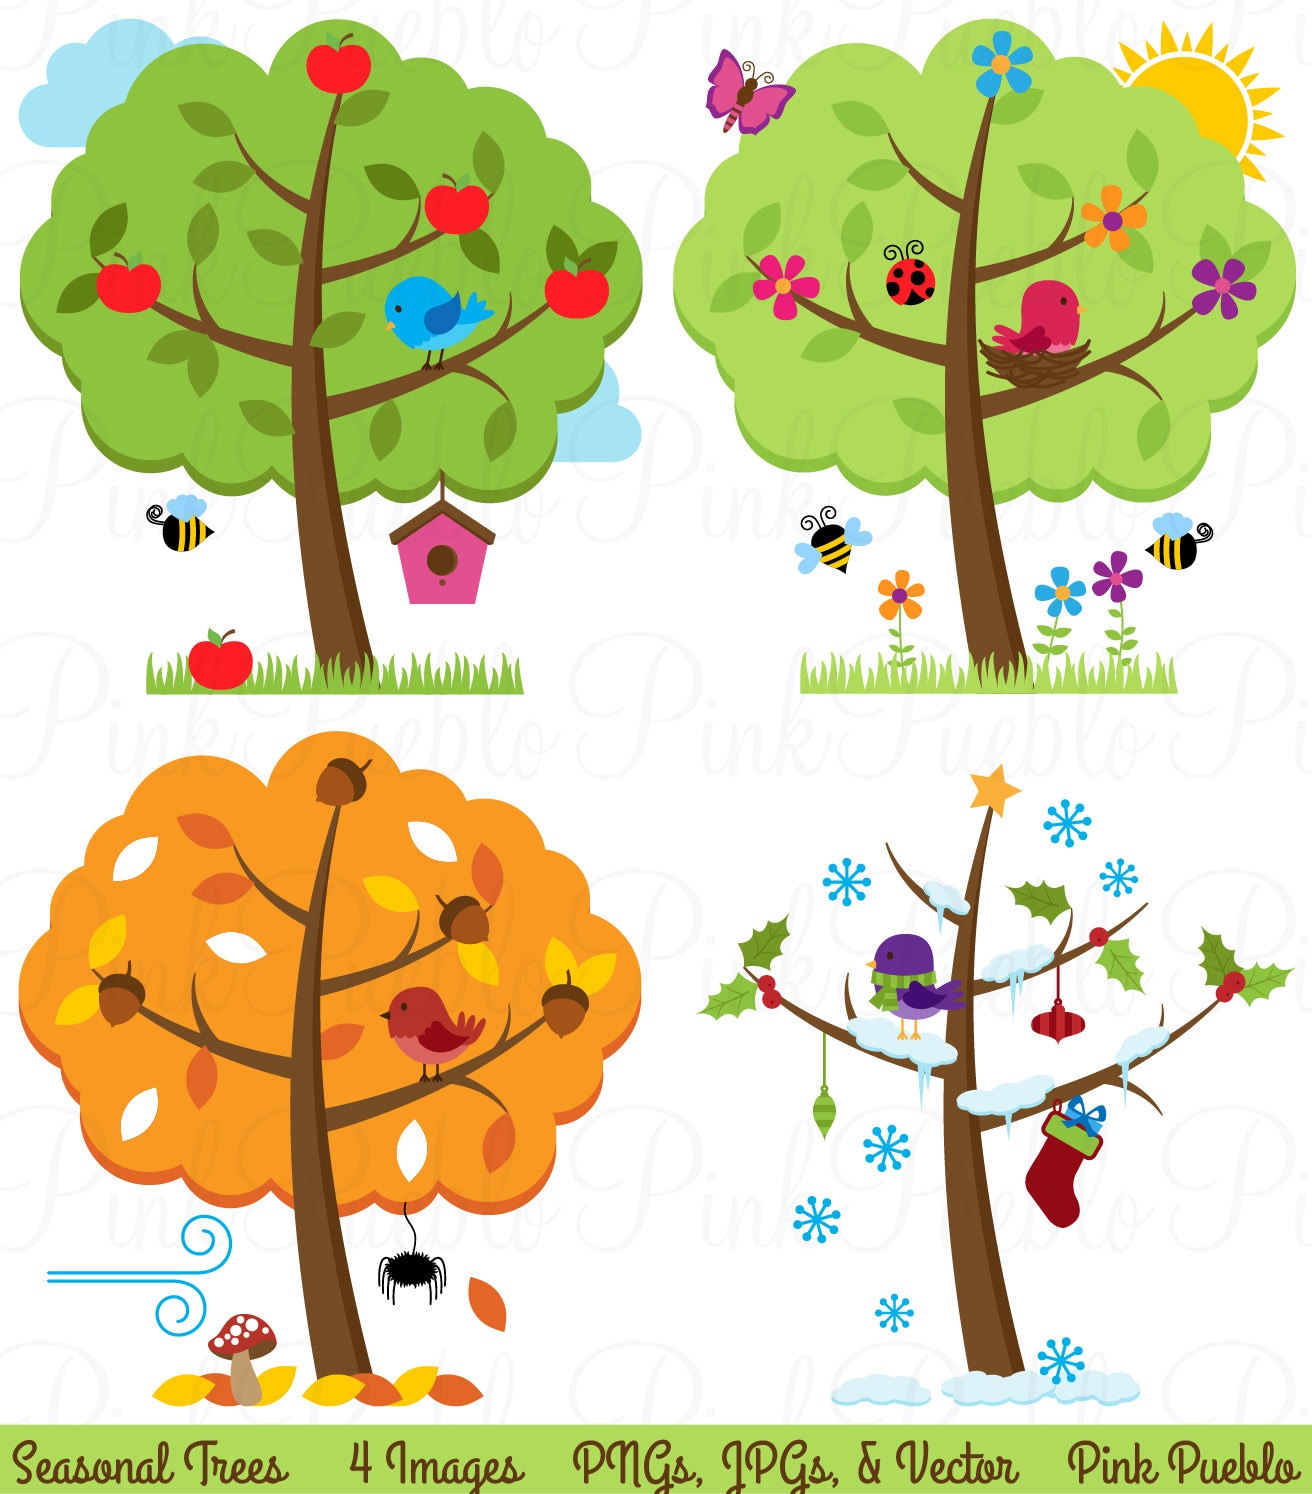 Winter tree with snow on branches seasonal Vector Image